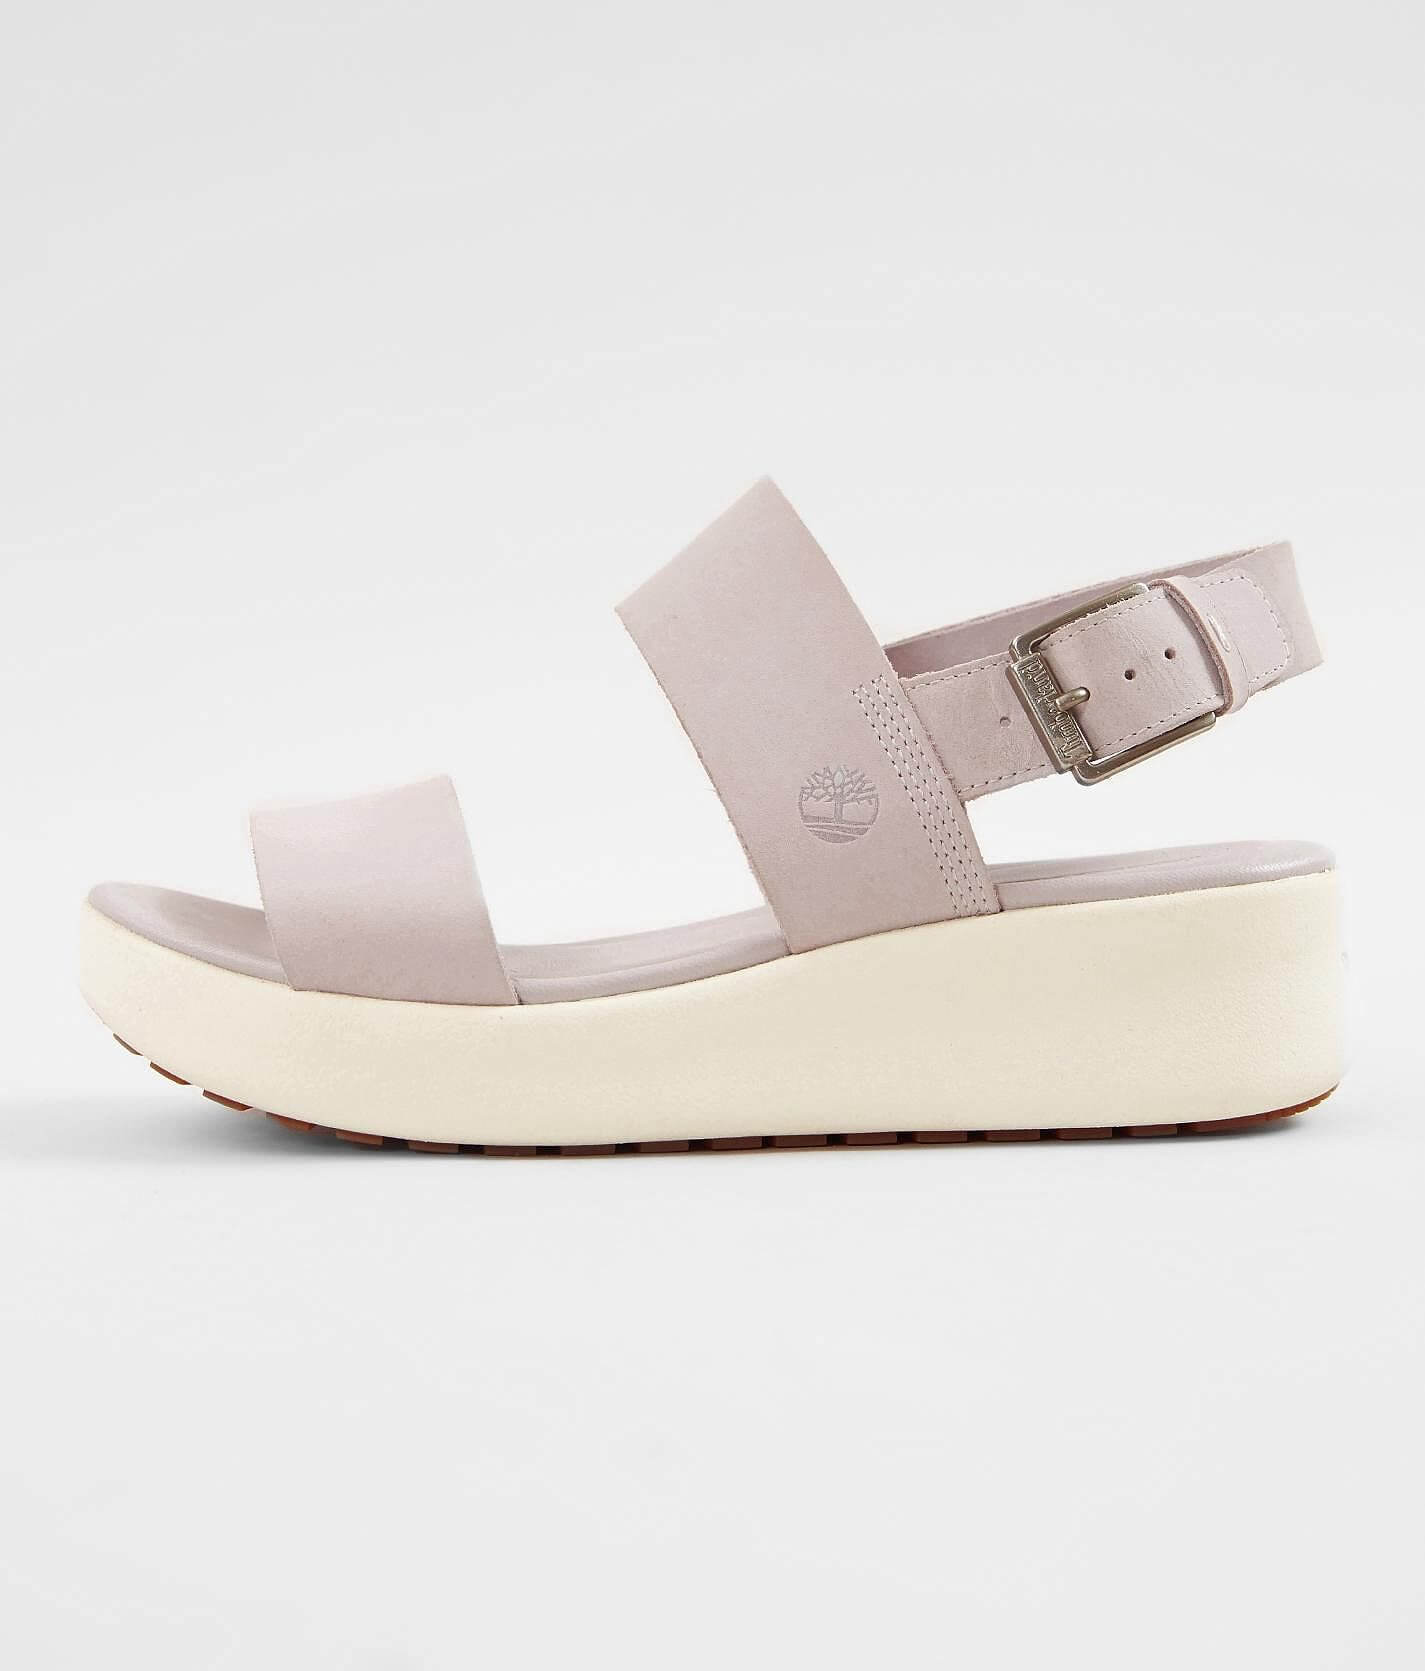 Timberland® Los Angeles Leather Sandal - Women's Shoes in Light Purple Nubuck | Buckle